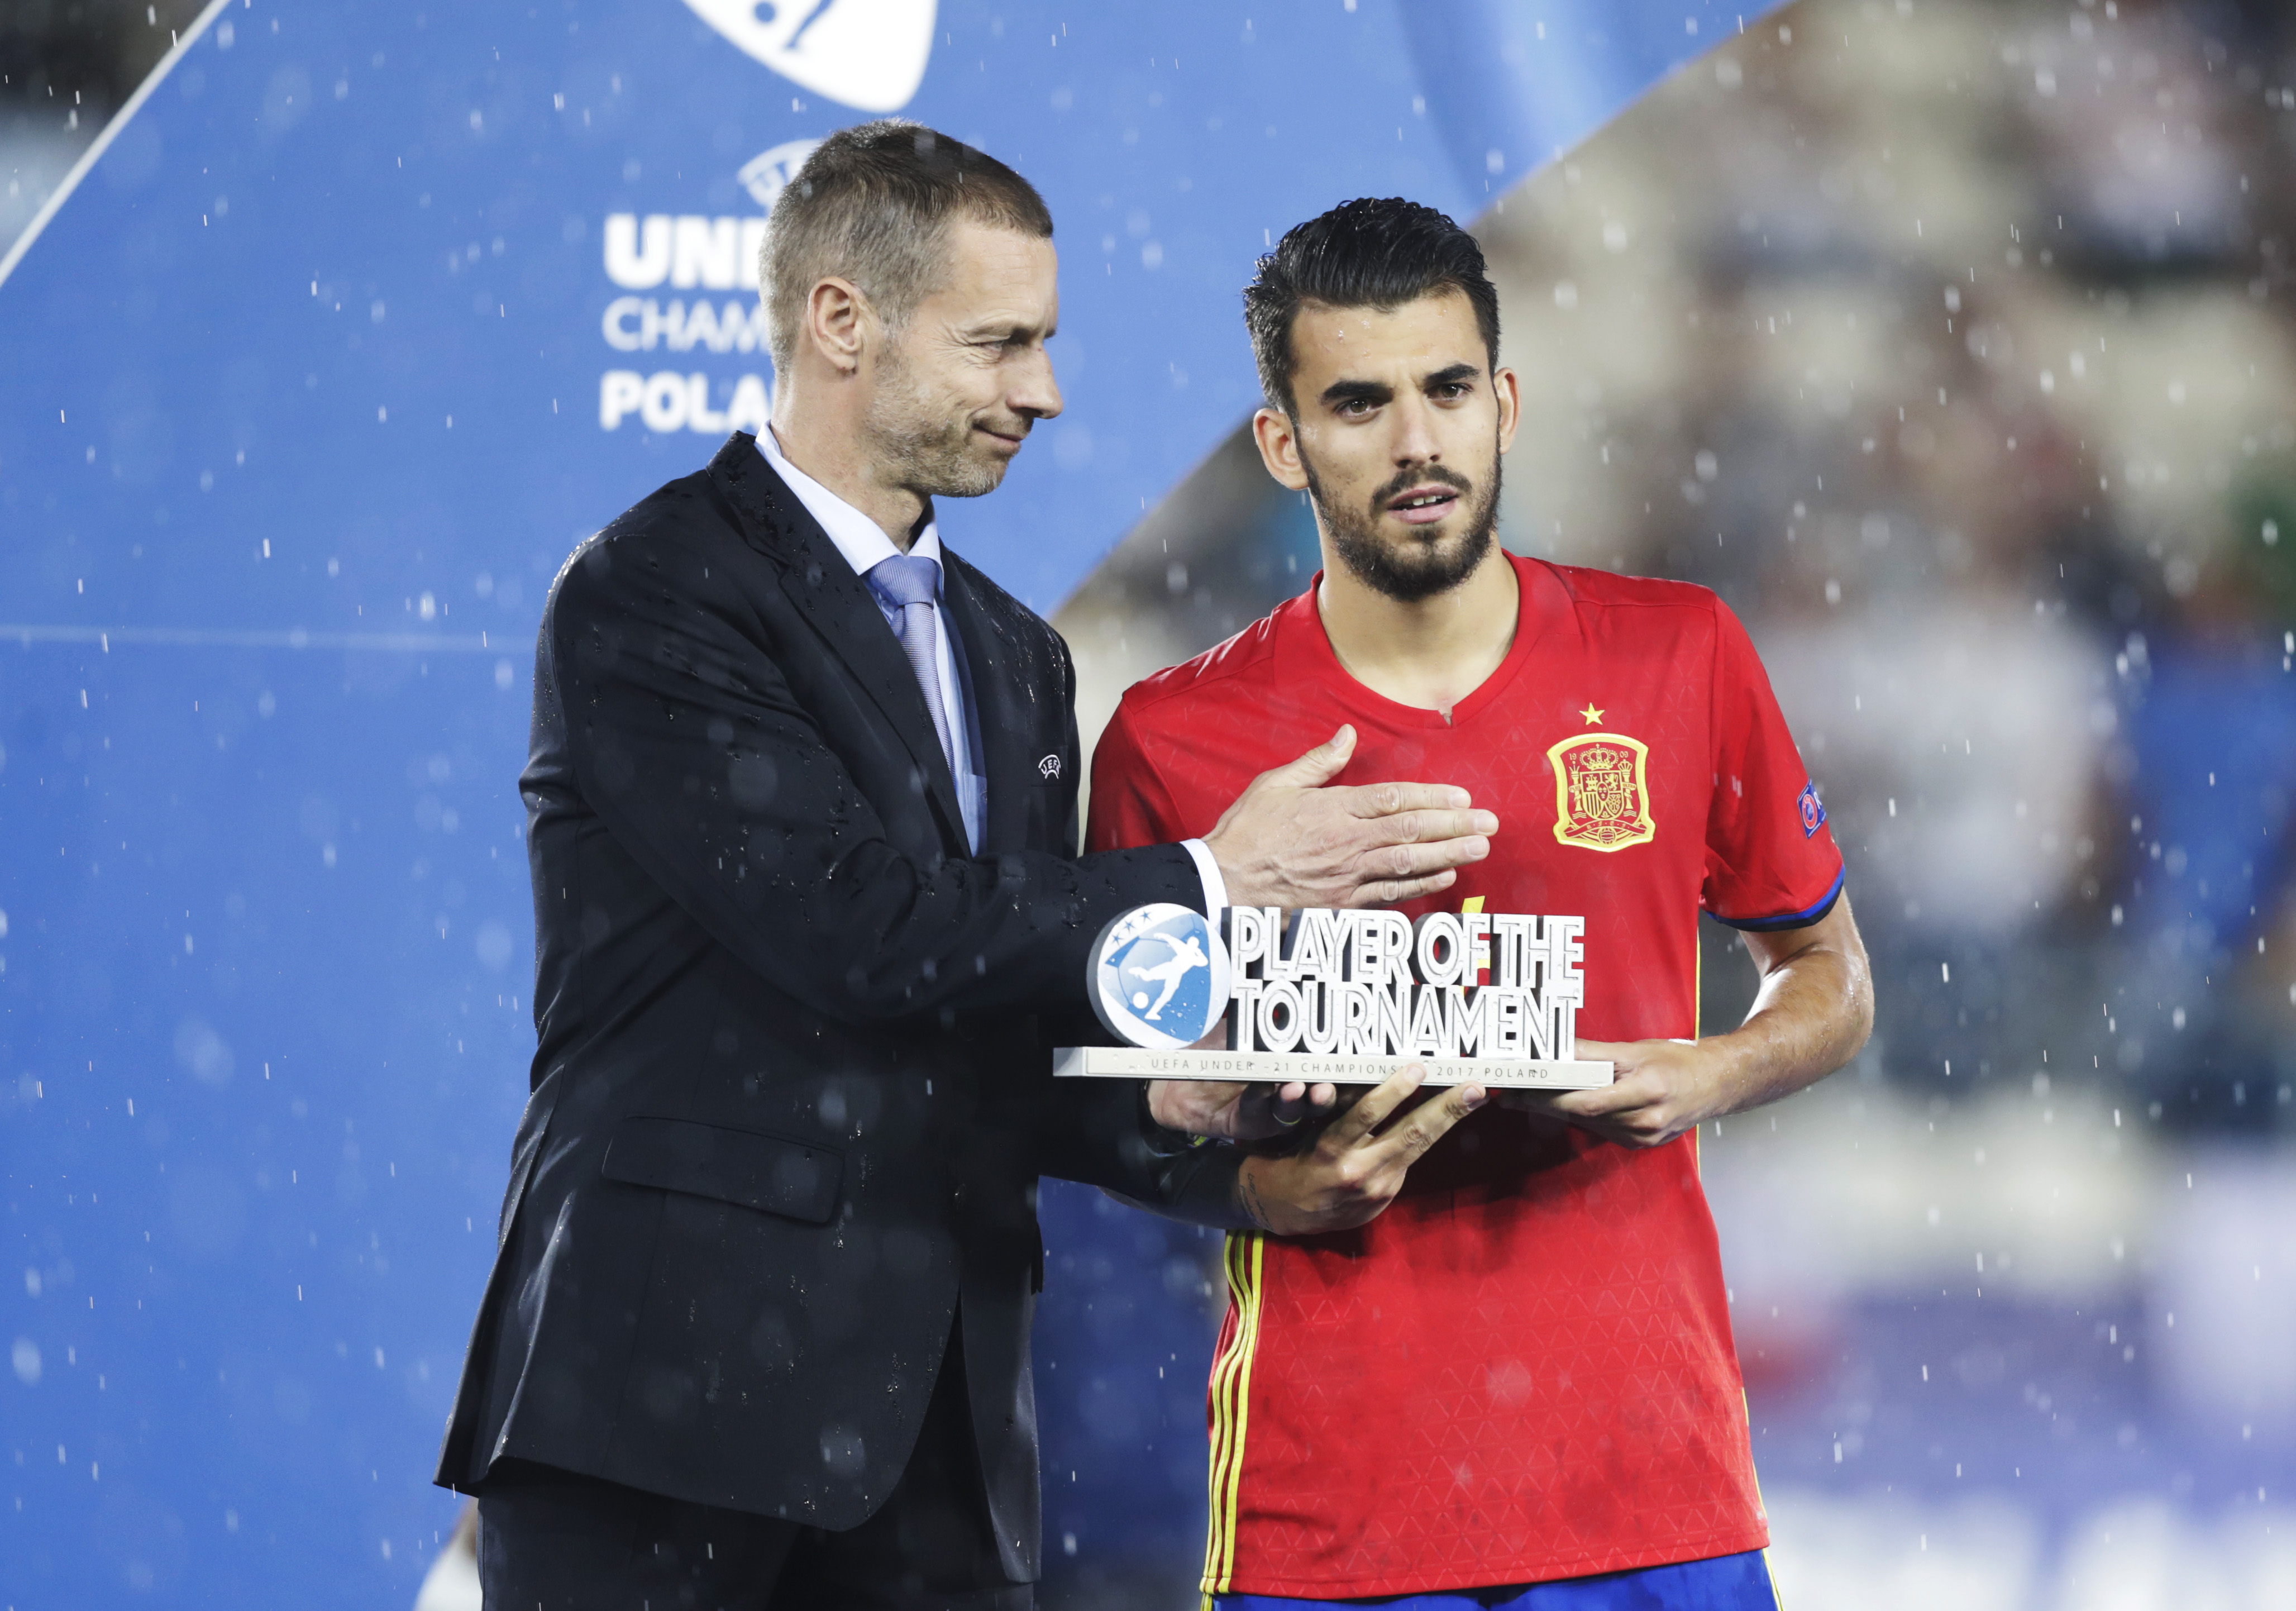 KRAKOW, POLAND - JUNE 30: Dani Ceballos is presented with the trophy for the top scorer during the UEFA U21 Final match between Germany and Spain at Krakow Stadium on June 30, 2017 in Krakow, Poland. (Photo by Nils Petter Nilsson/Ombrello/Getty Images)